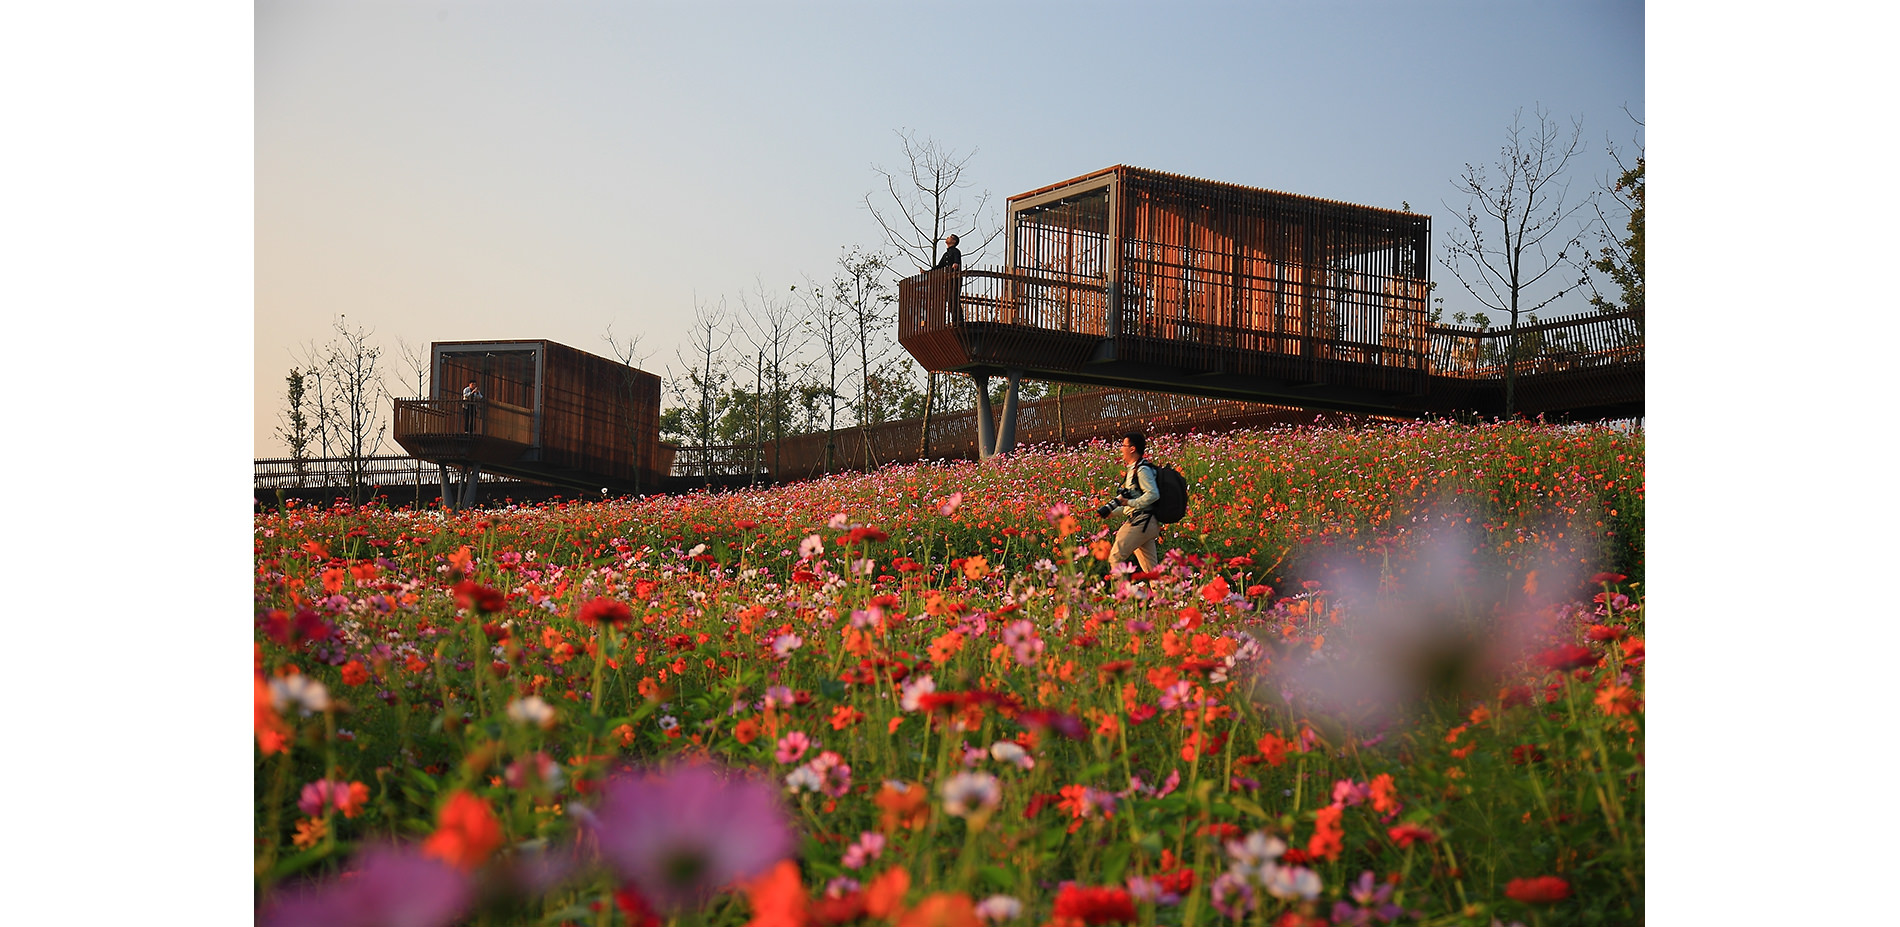 Pavilions and Skywalks Above a Field of Annual Flowers